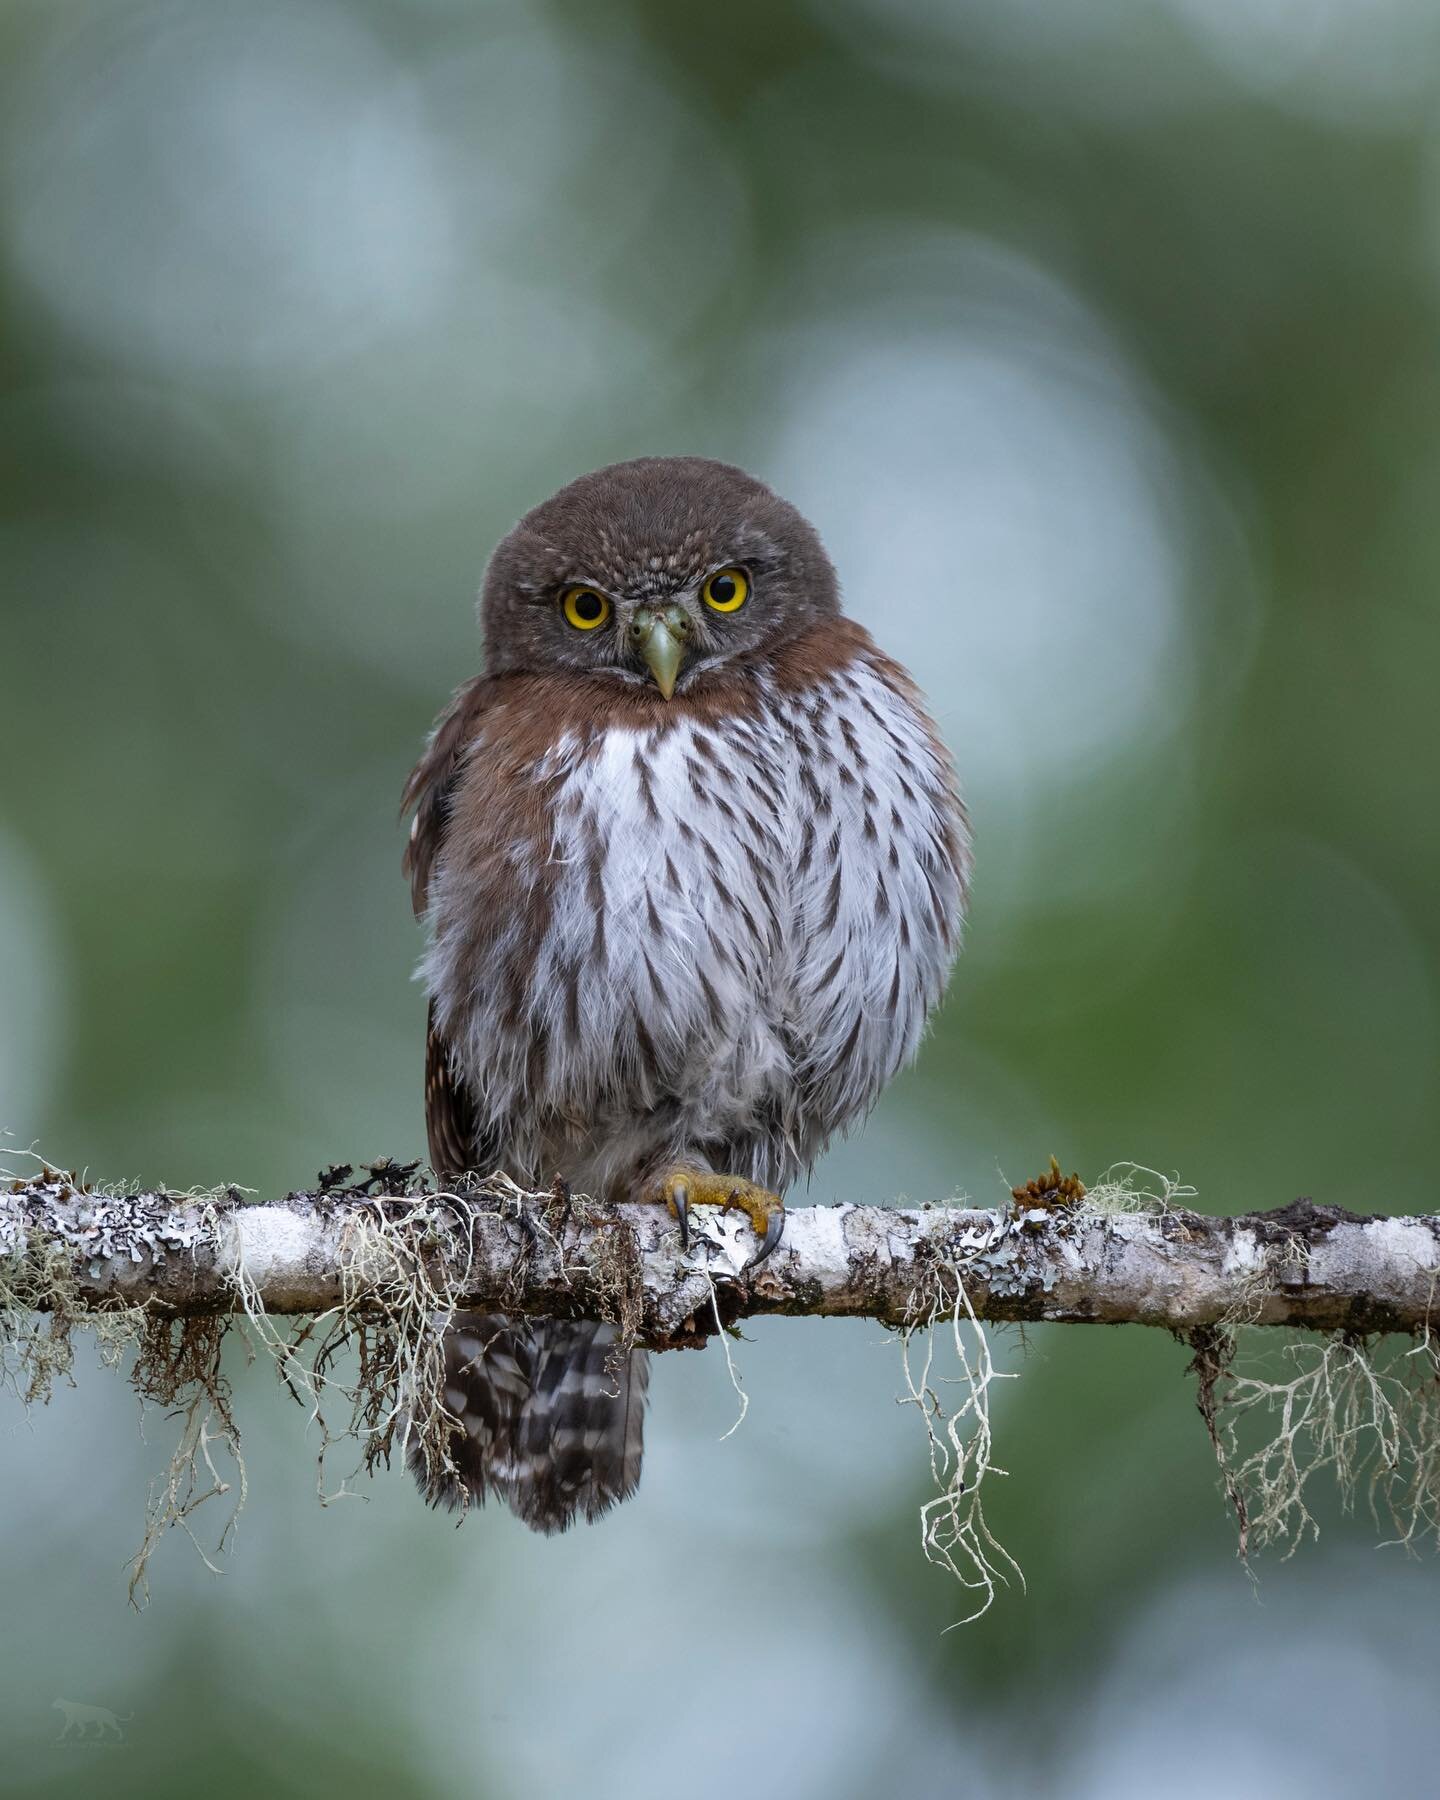 A northern pygmy owl watches me watching it. 👀 🦉